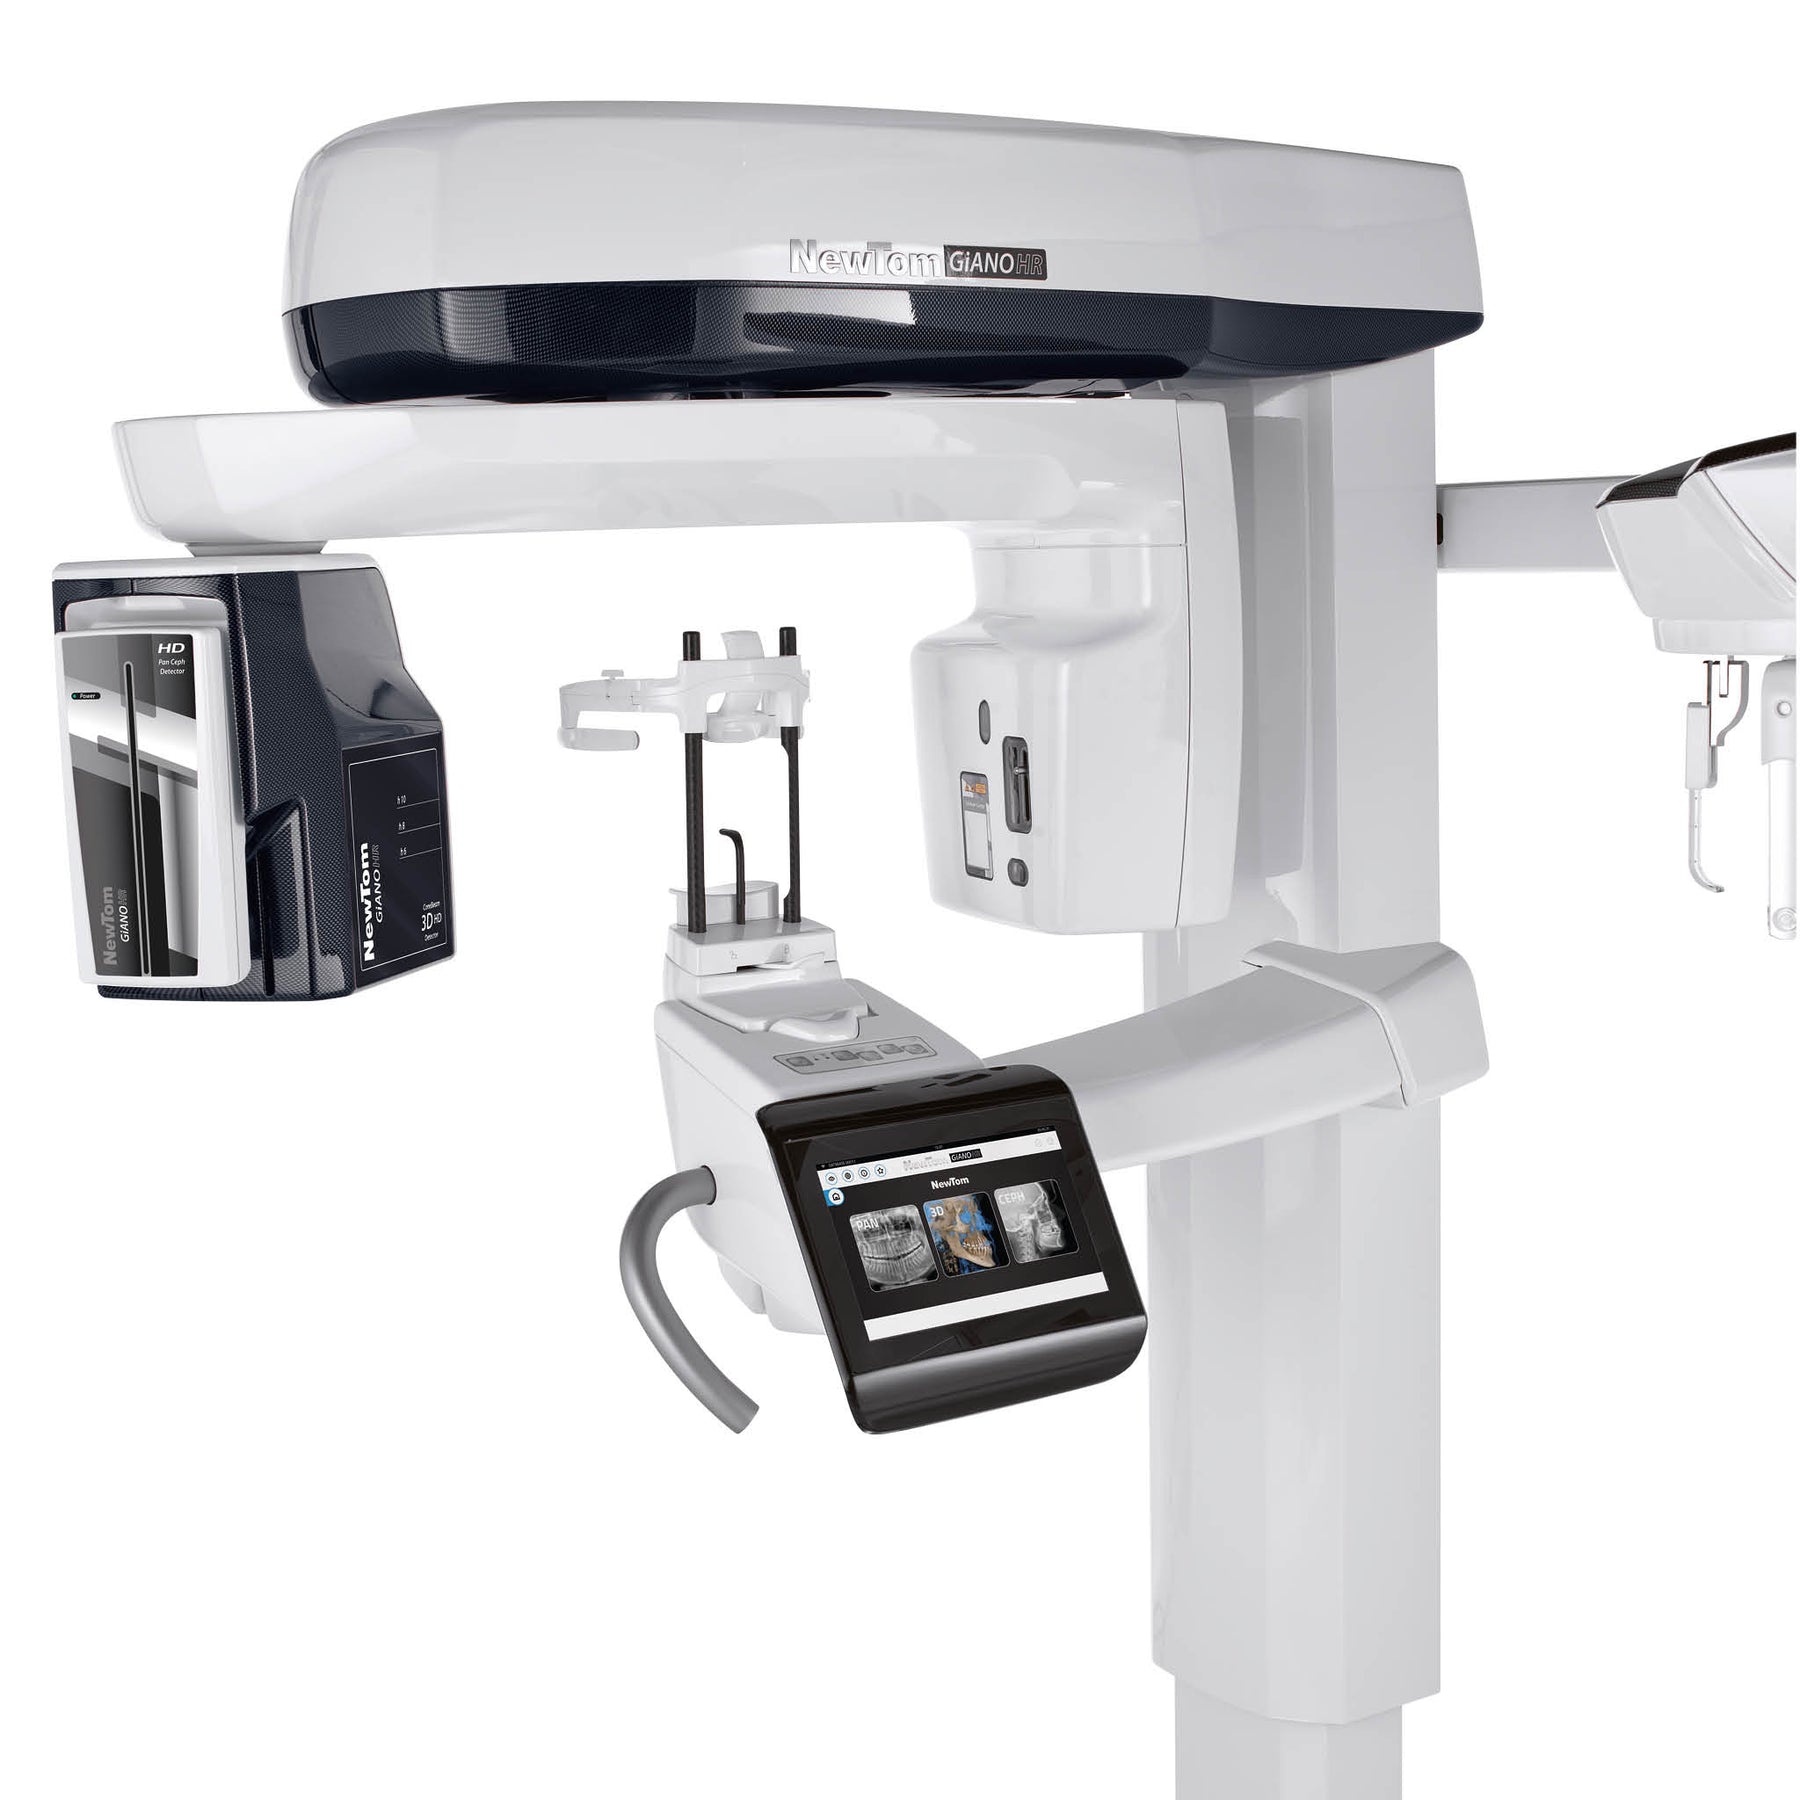 The GiANO HR is the complete hybrid CBCT for 2D/3D imaging, side view.